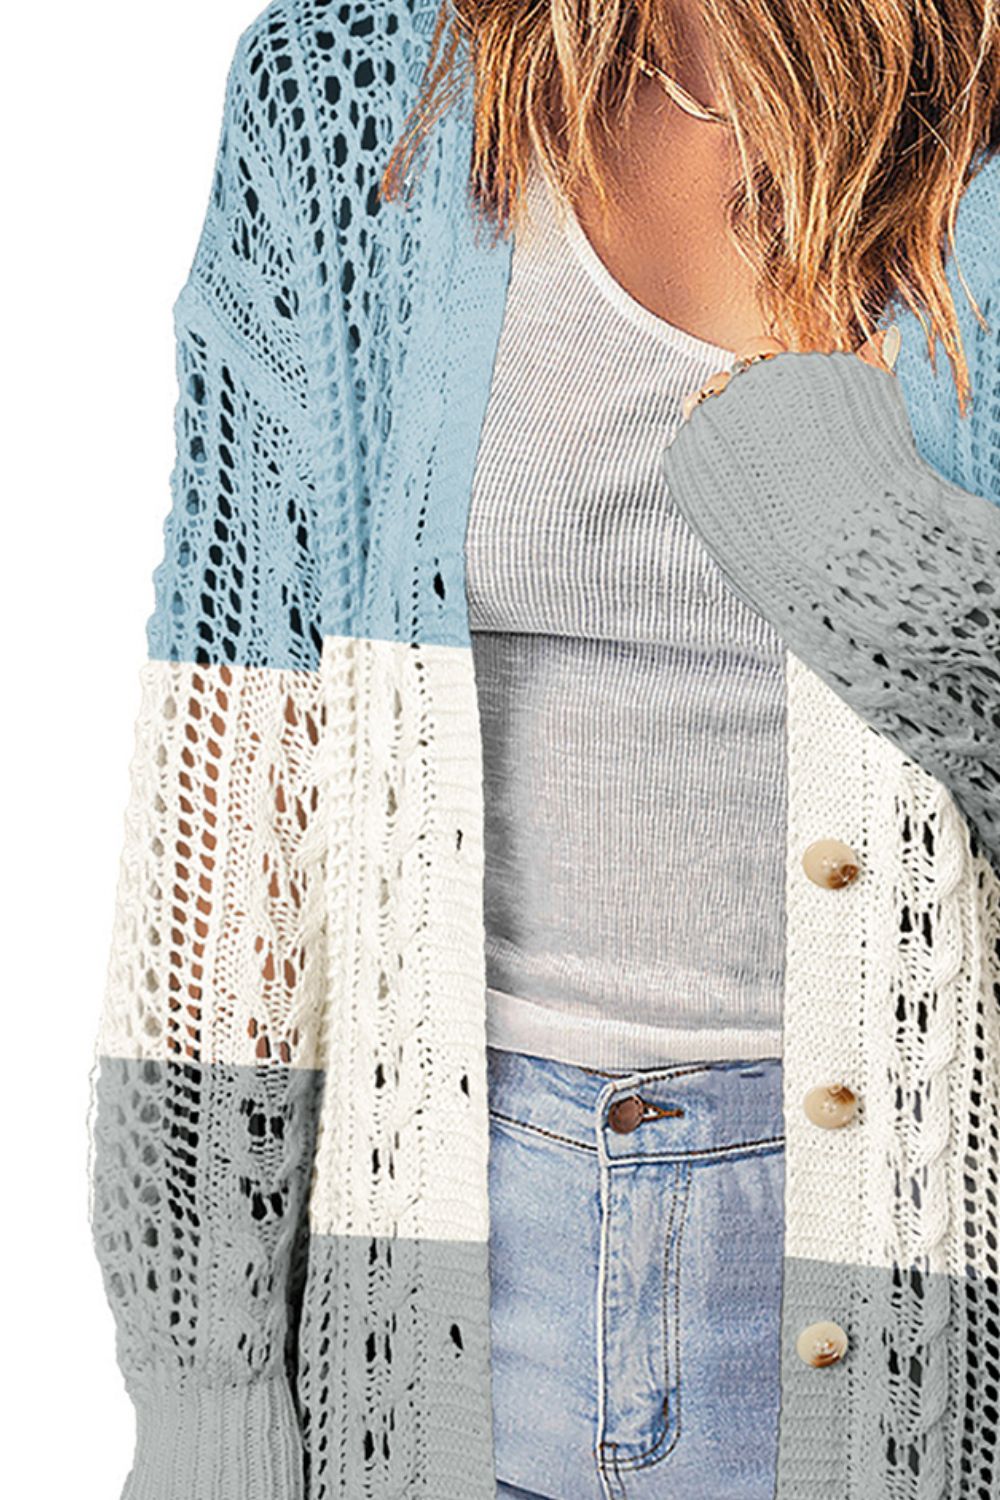 Openwork Ribbed Cuff Longline Cardigan - Women’s Clothing & Accessories - Shirts & Tops - 16 - 2024